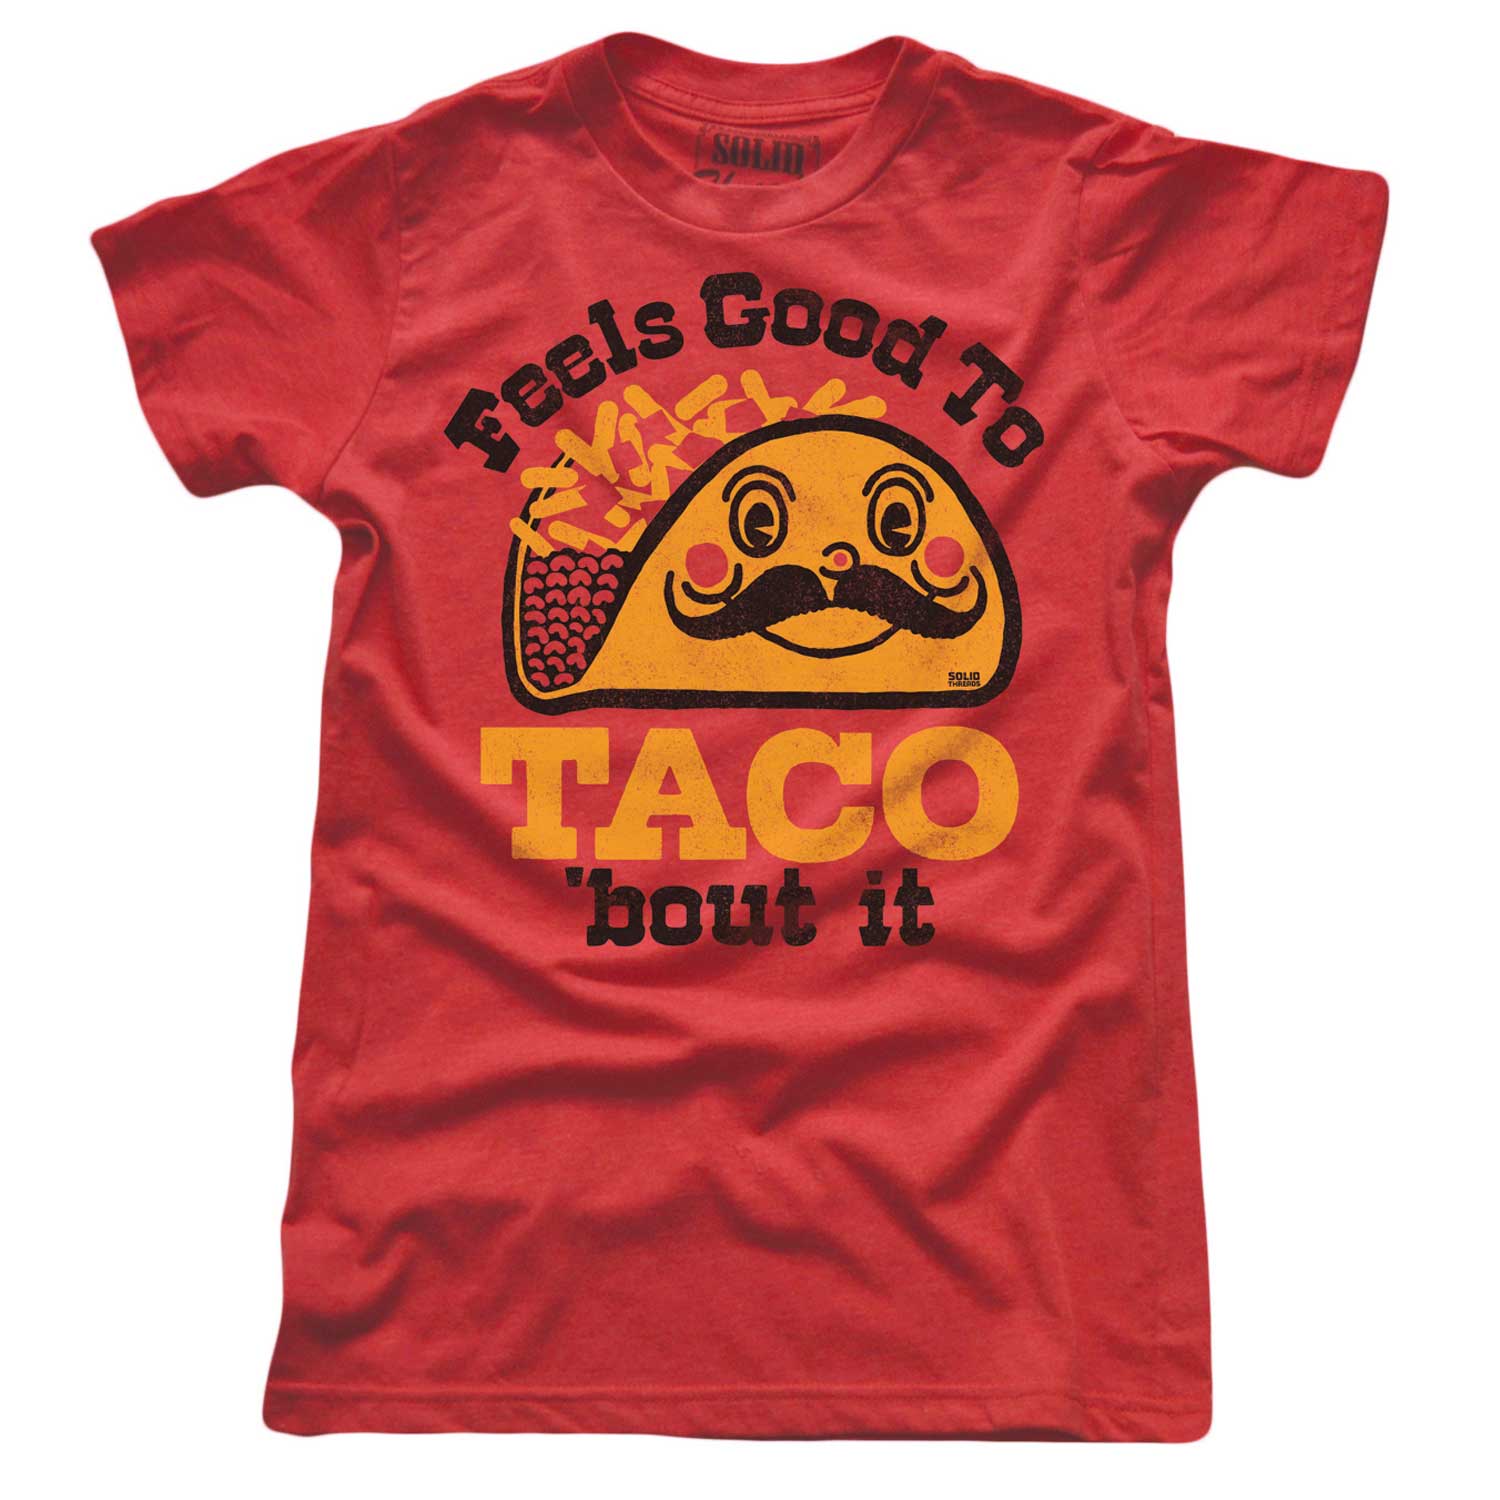 Women's Feels Good to Taco Bout It Vintage Graphic Crop Top | Funny Taco T-shirt | Solid Threads